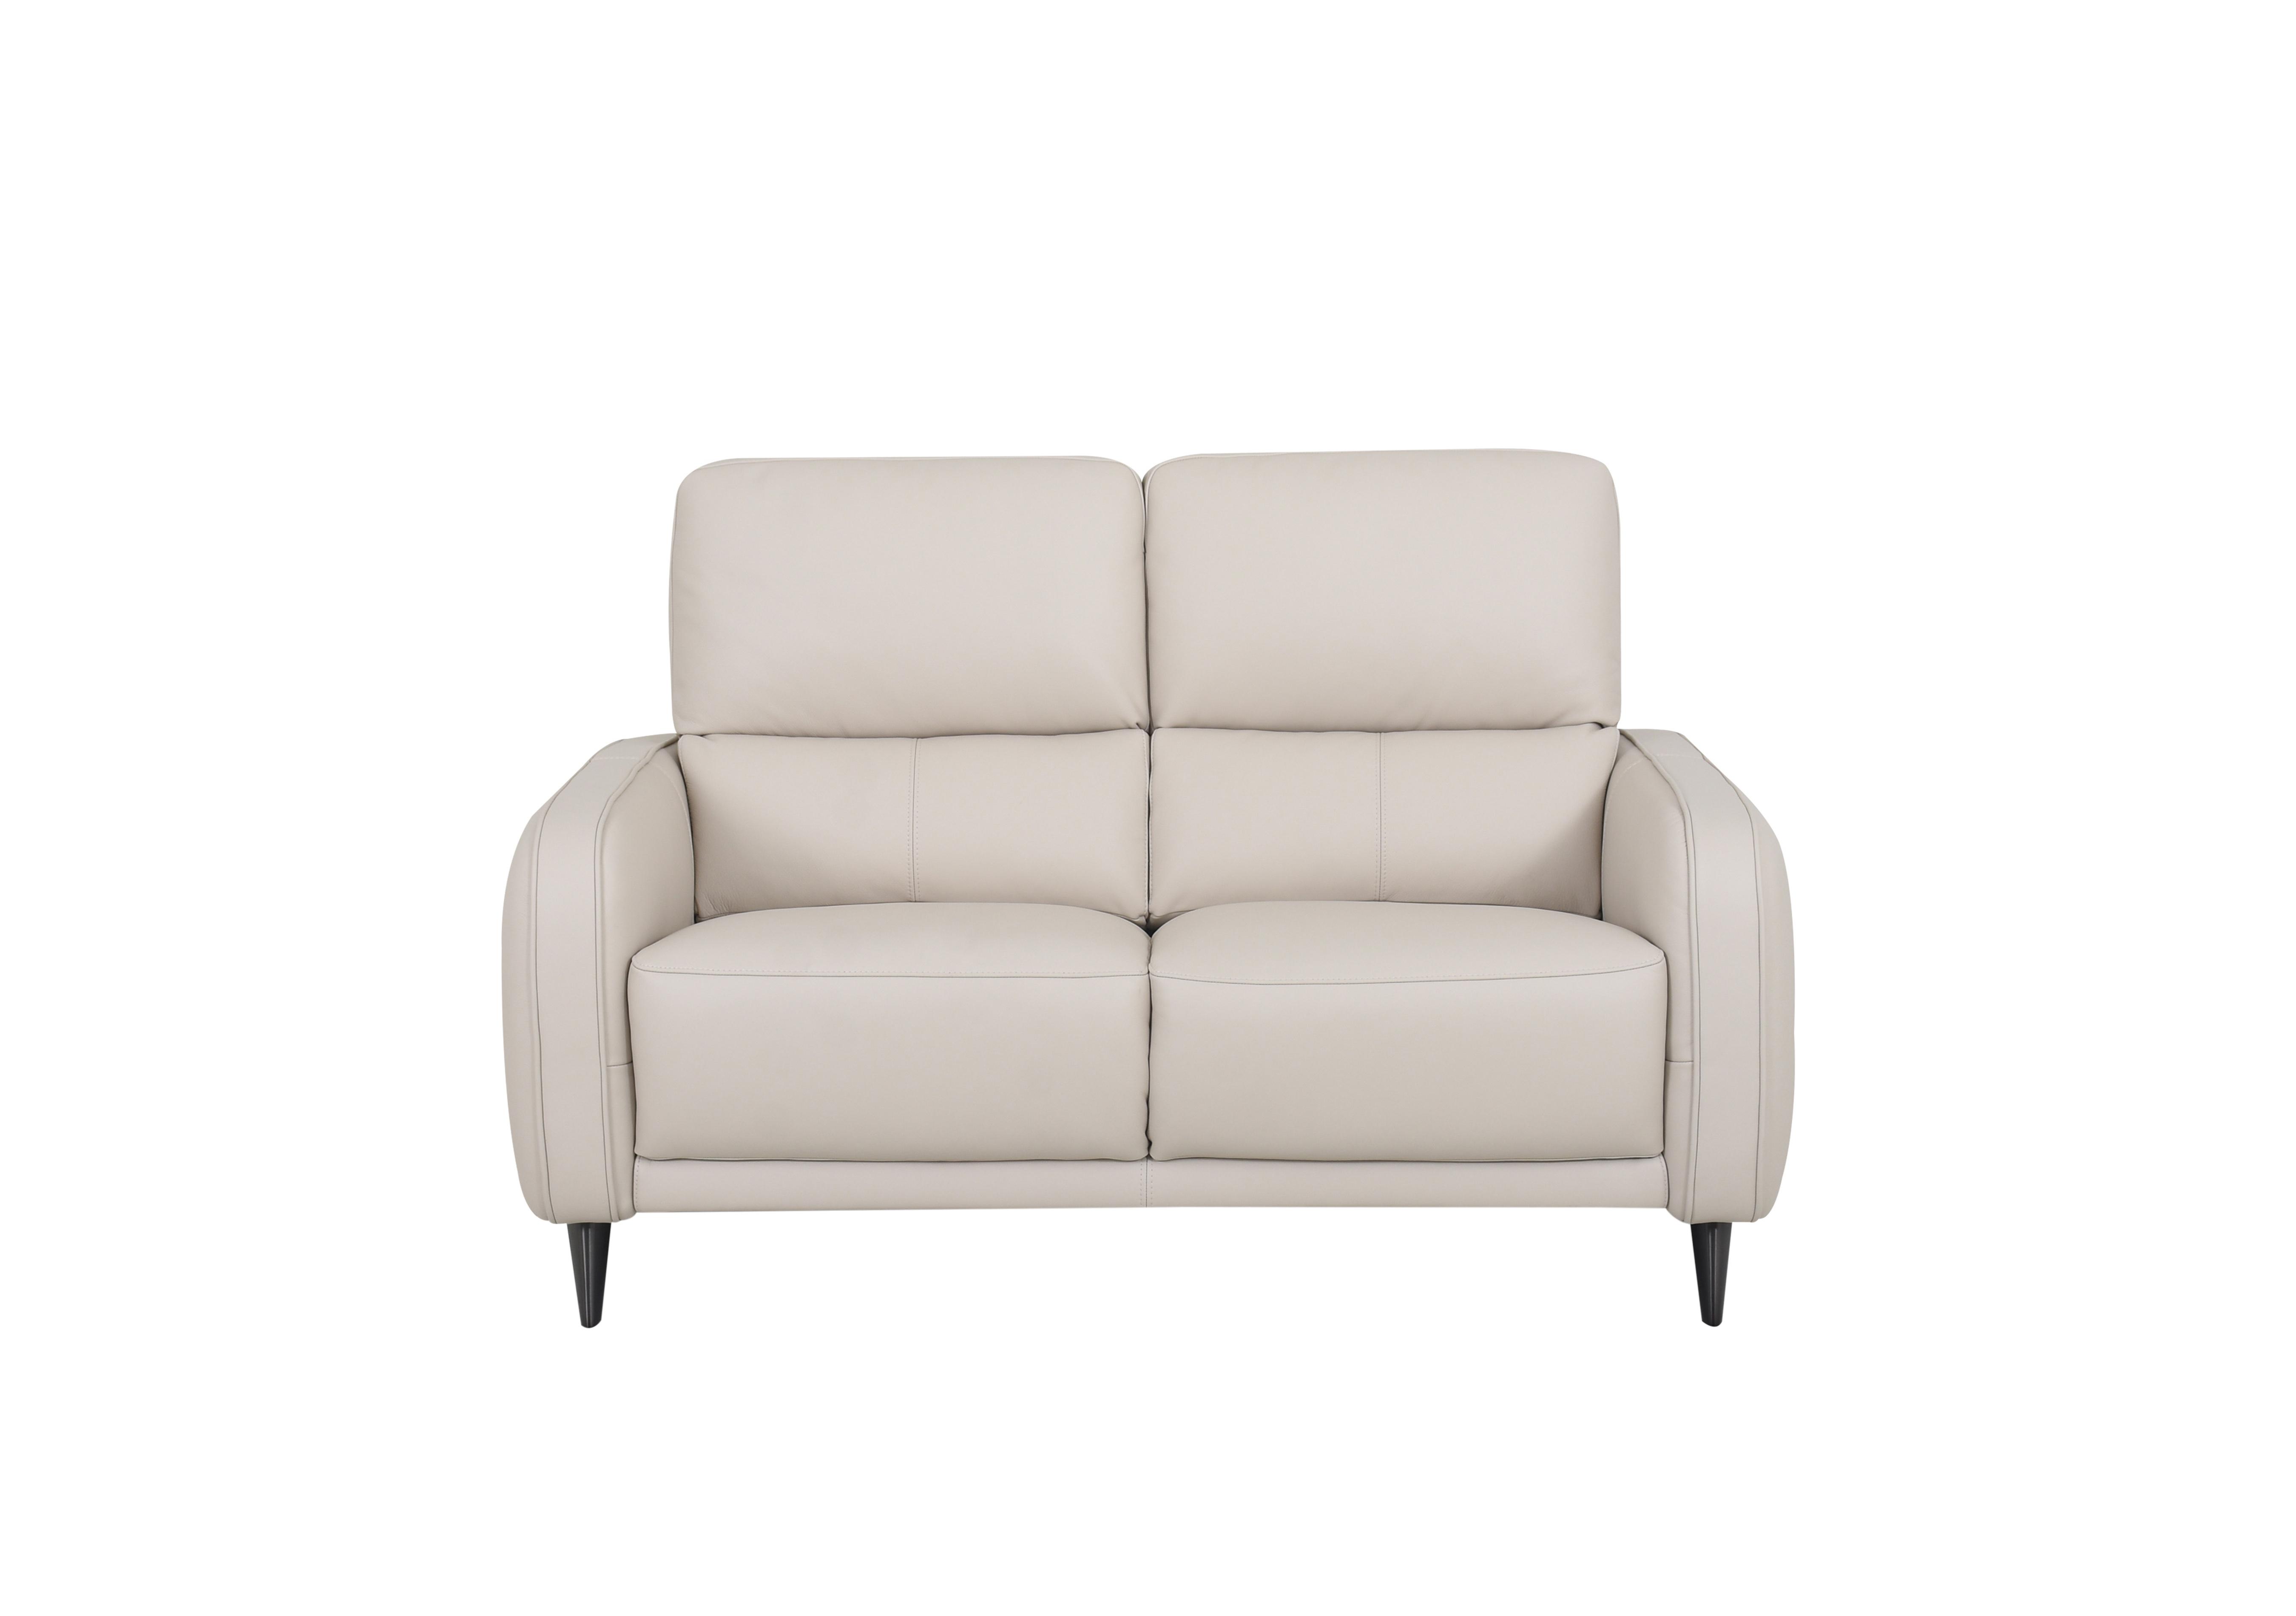 Logan 2 Seater Leather Sofa in Nn-521e Frost on Furniture Village